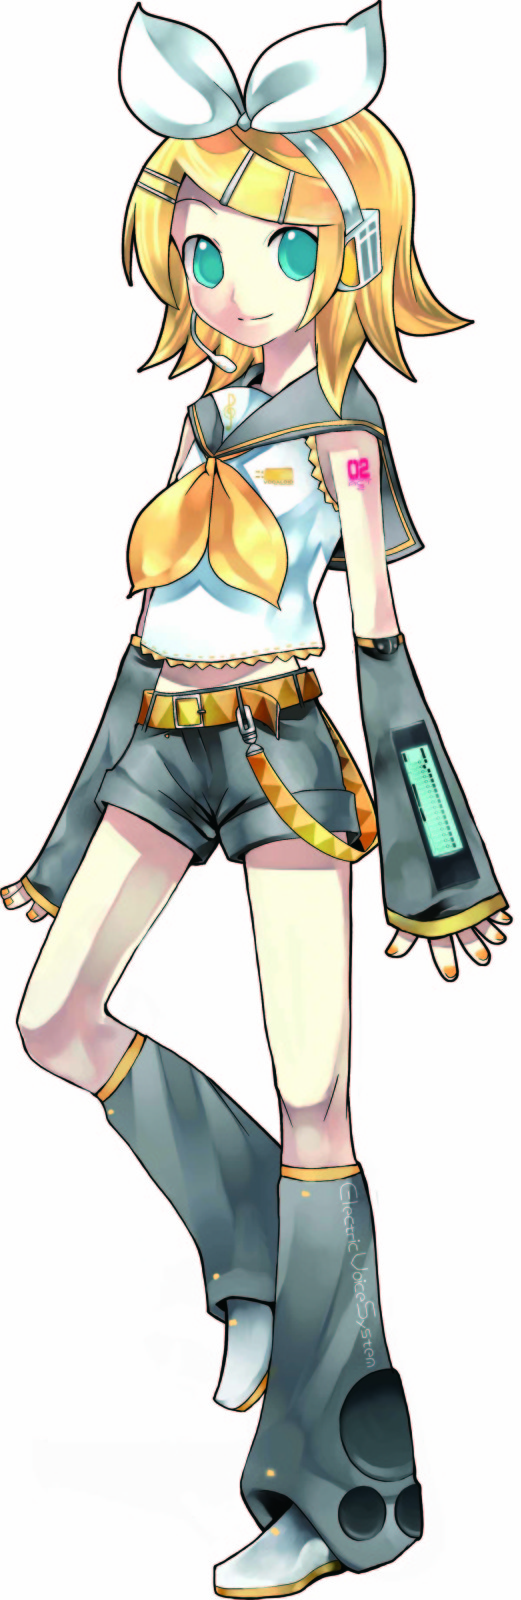 http://img2.wikia.nocookie.net/__cb20111206183939/vocaloid/images/archive/0/0a/20140826004349!Kagamine_Rin.jpg